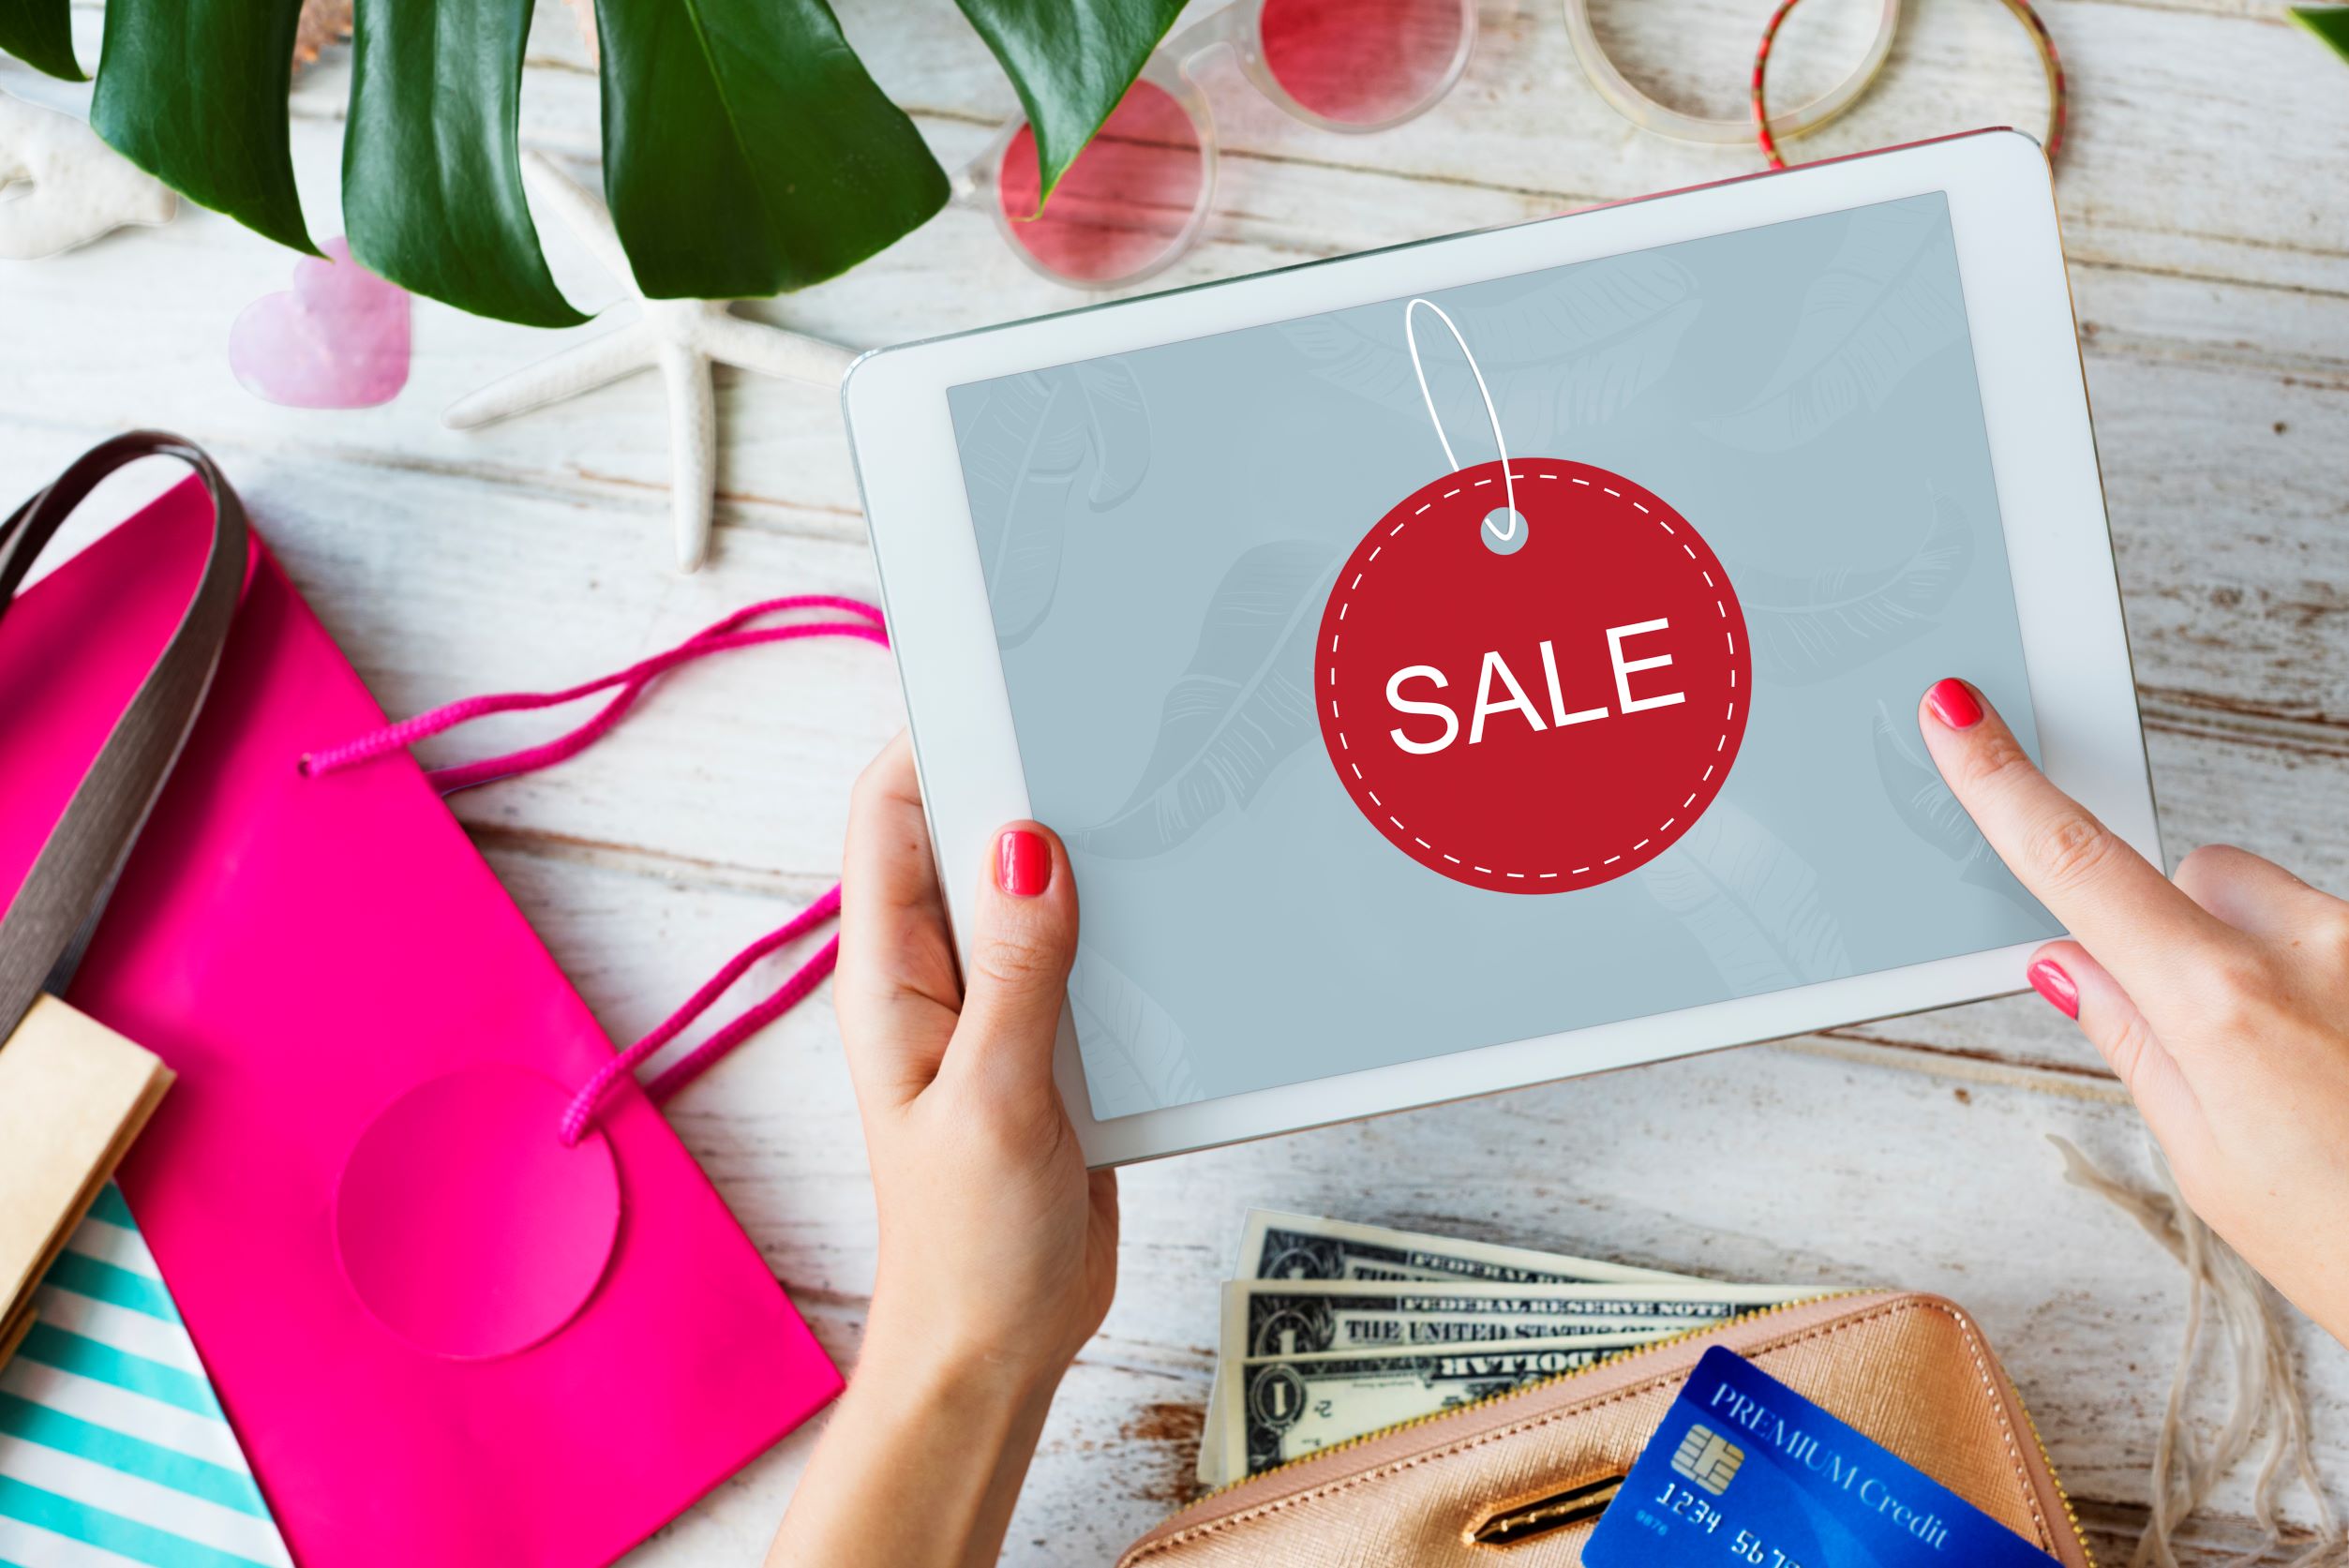 Black Friday: How To Make Sure Your Website is Prepared and Optimised for Increased Sales During Peak Trading Periods